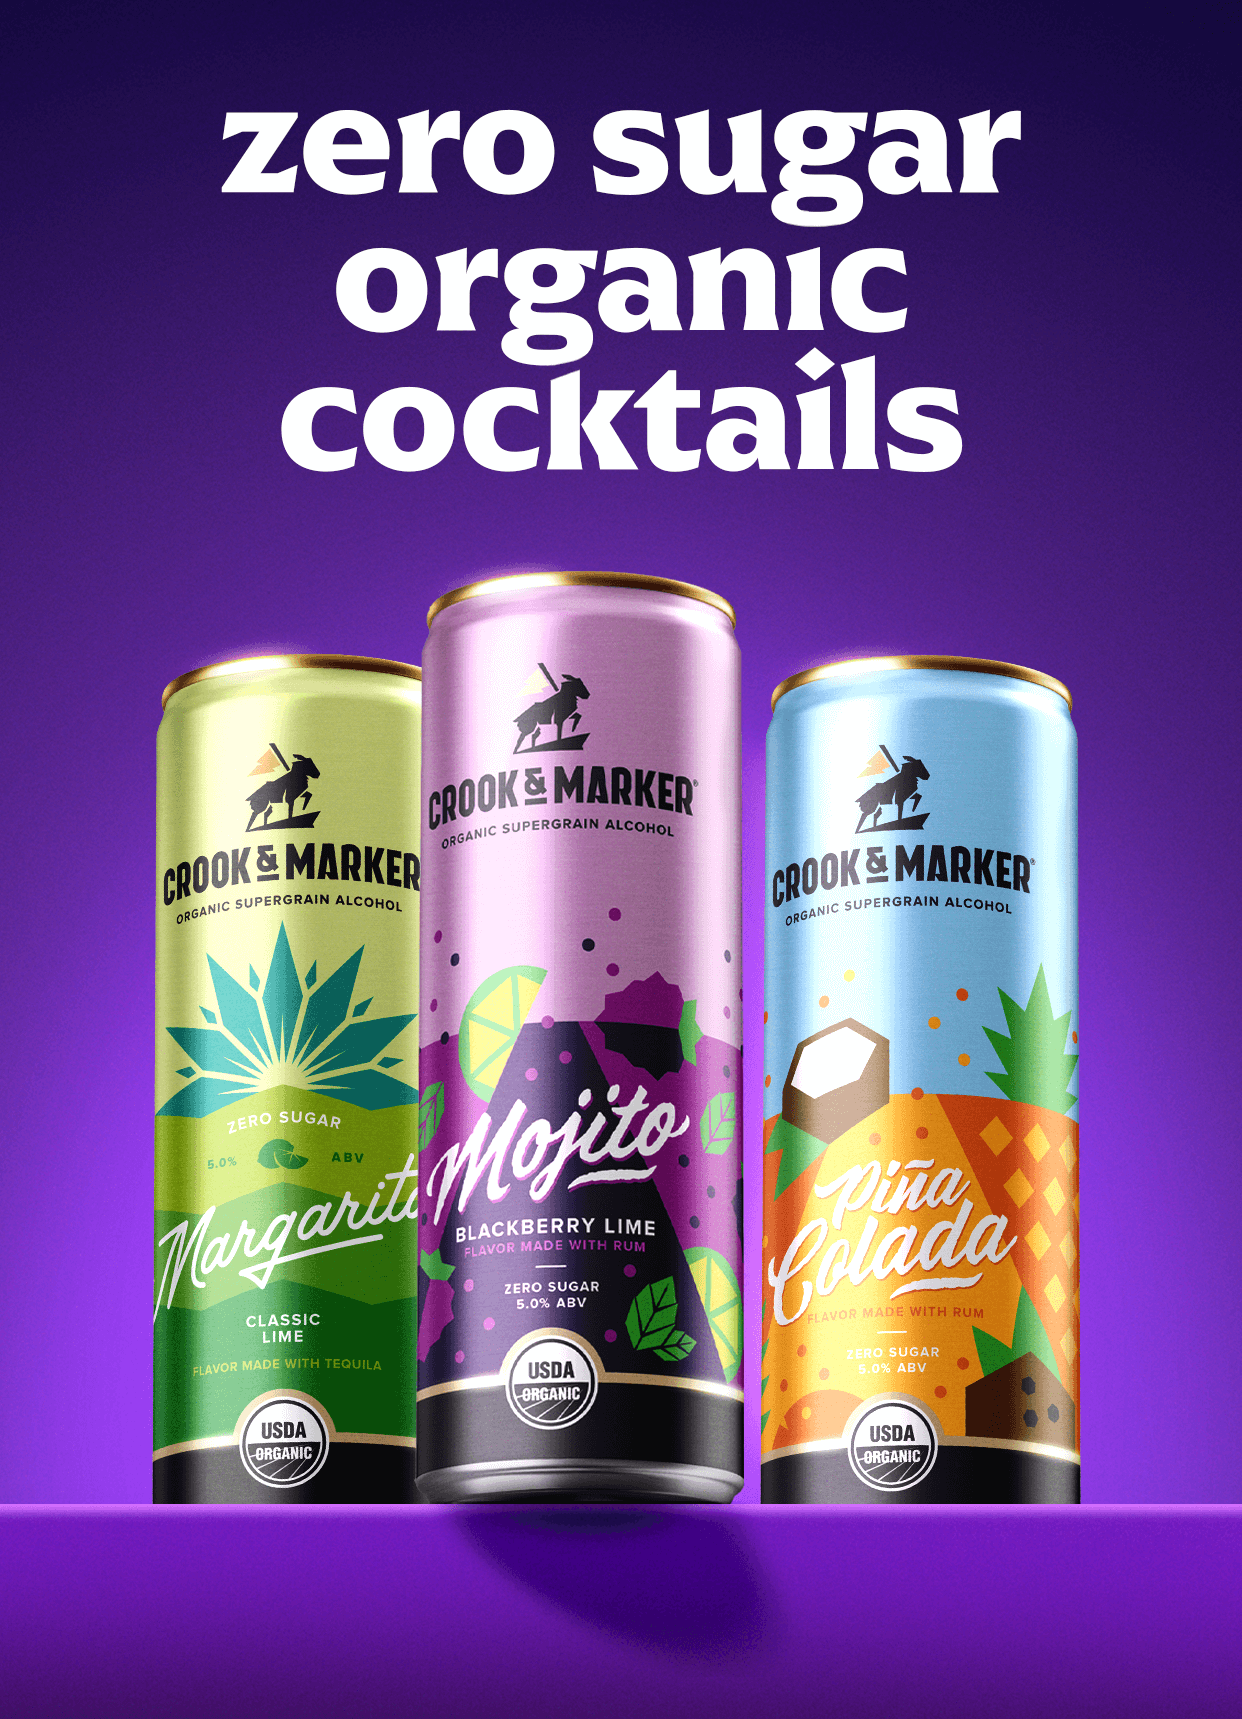 zero sugar organic cocktails from crook and marker